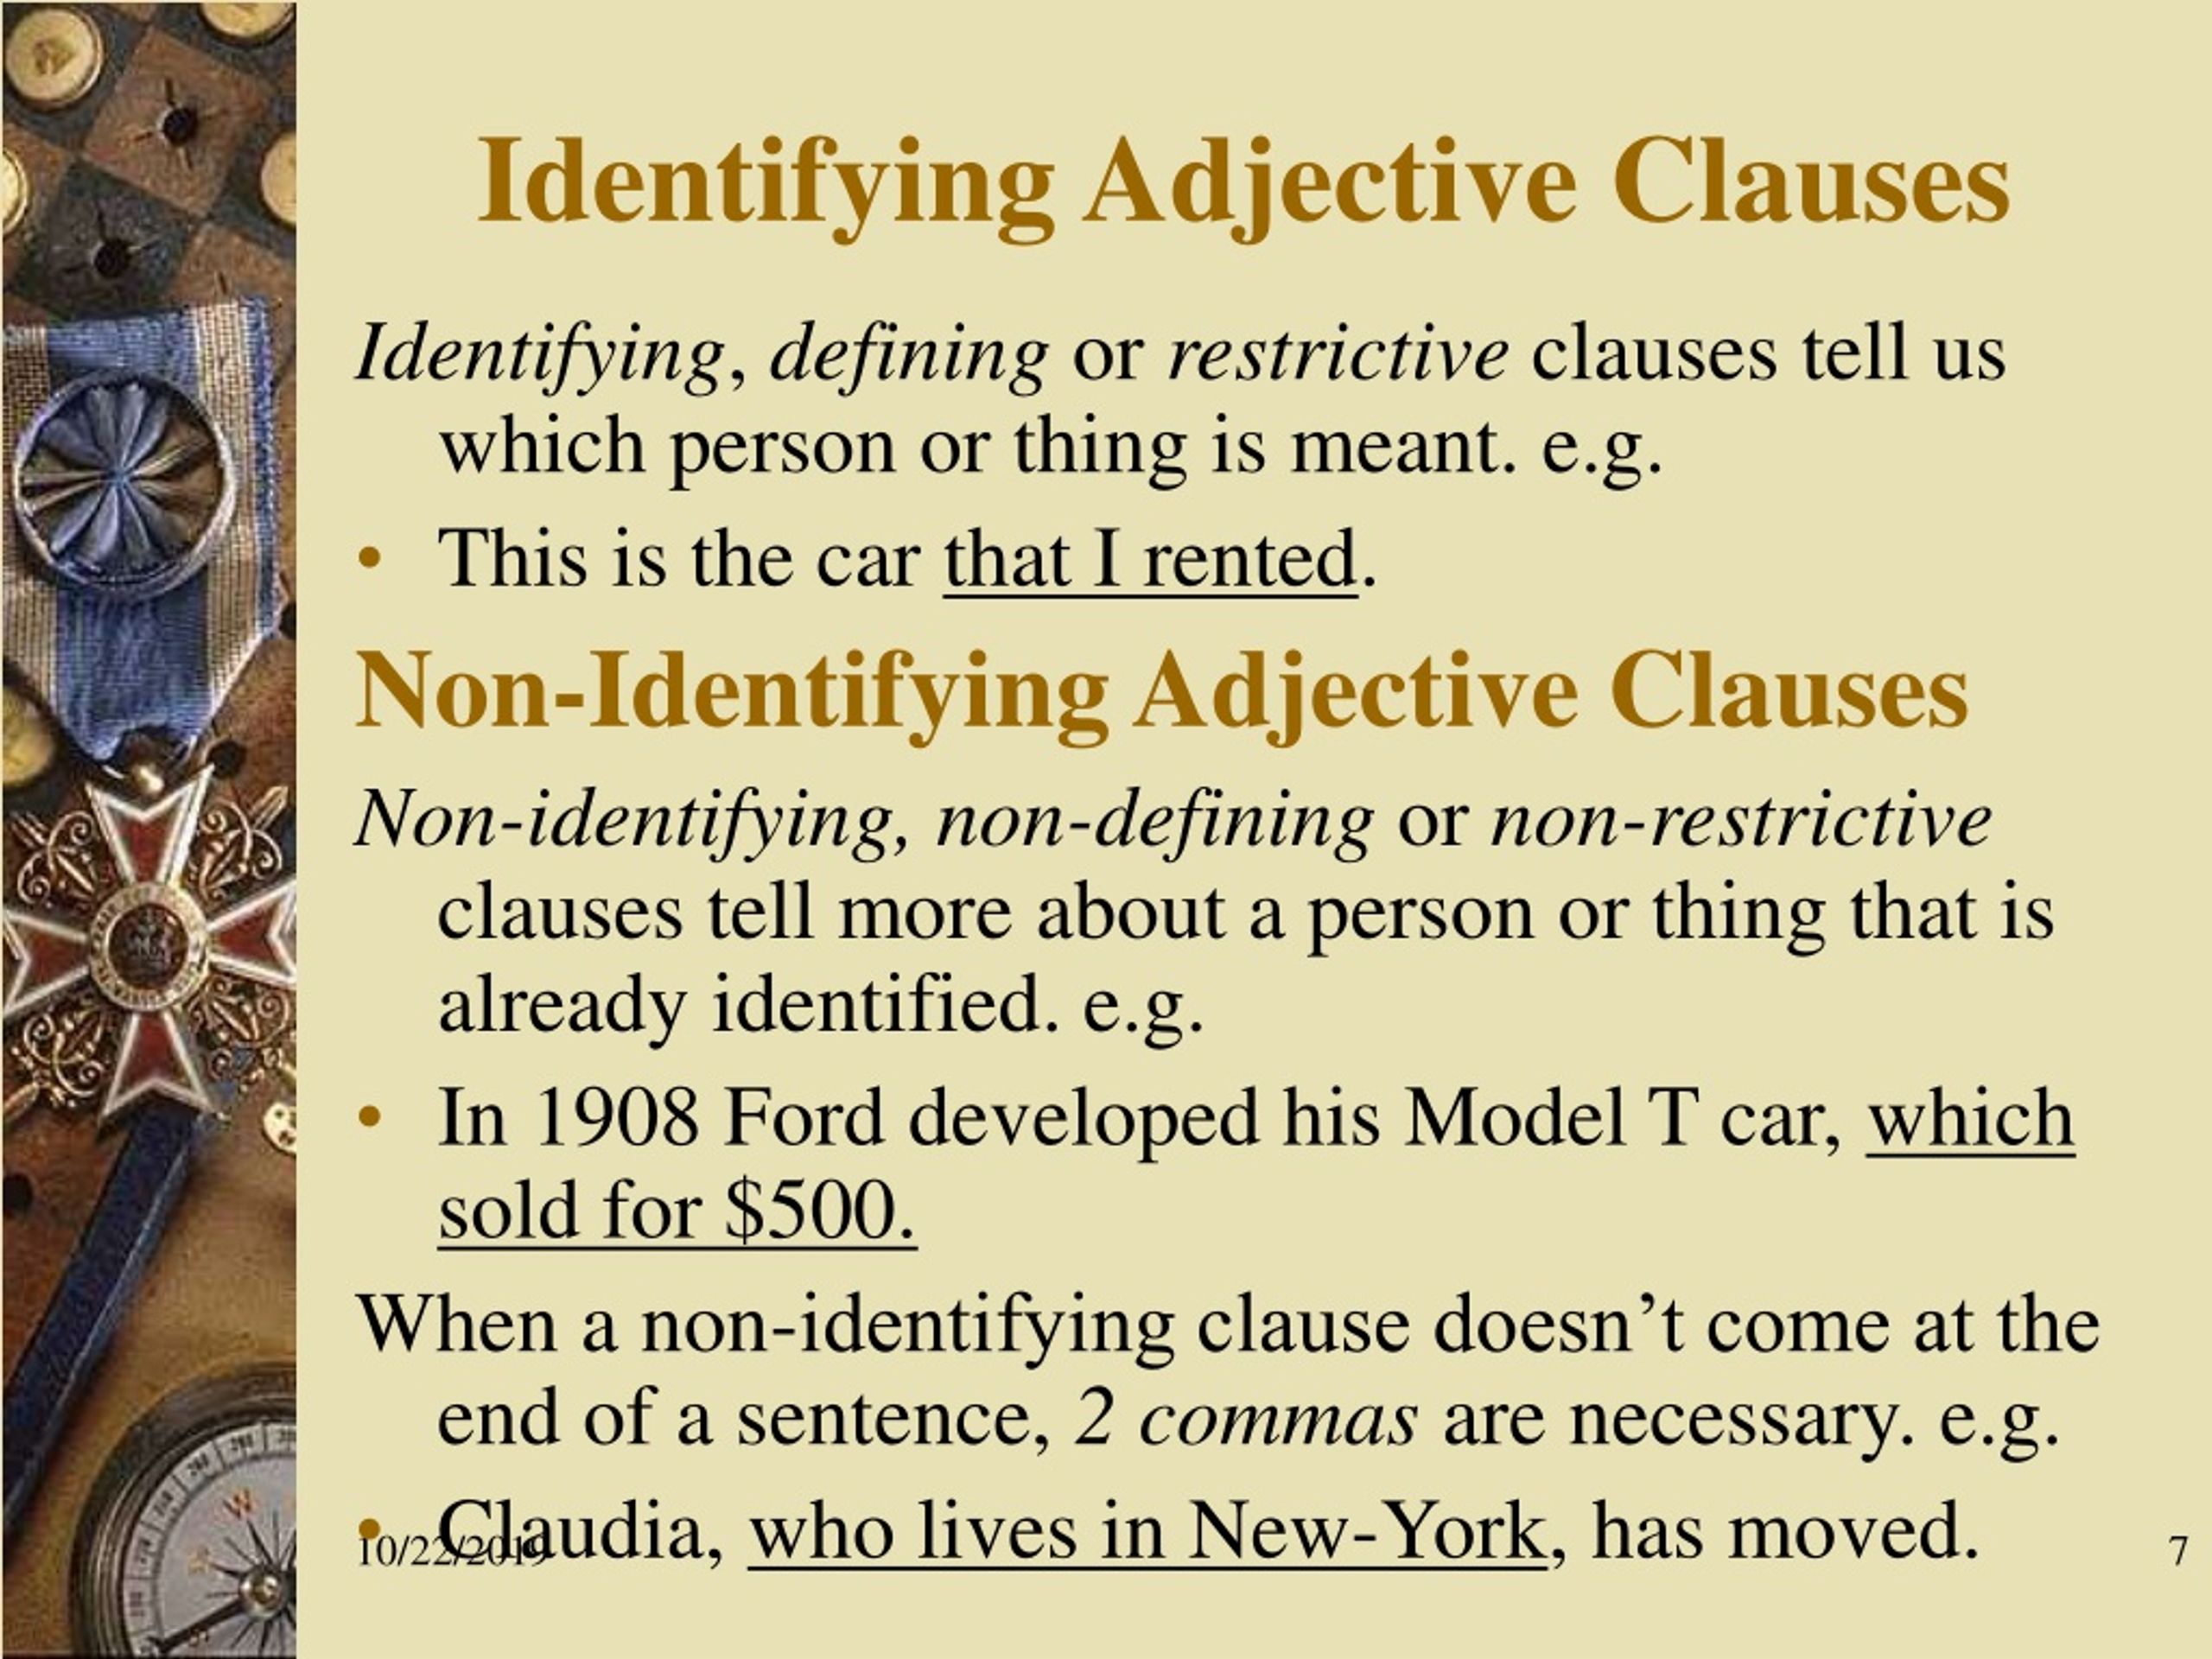 PPT ADJECTIVE CLAUSES PowerPoint Presentation Free Download ID 501937